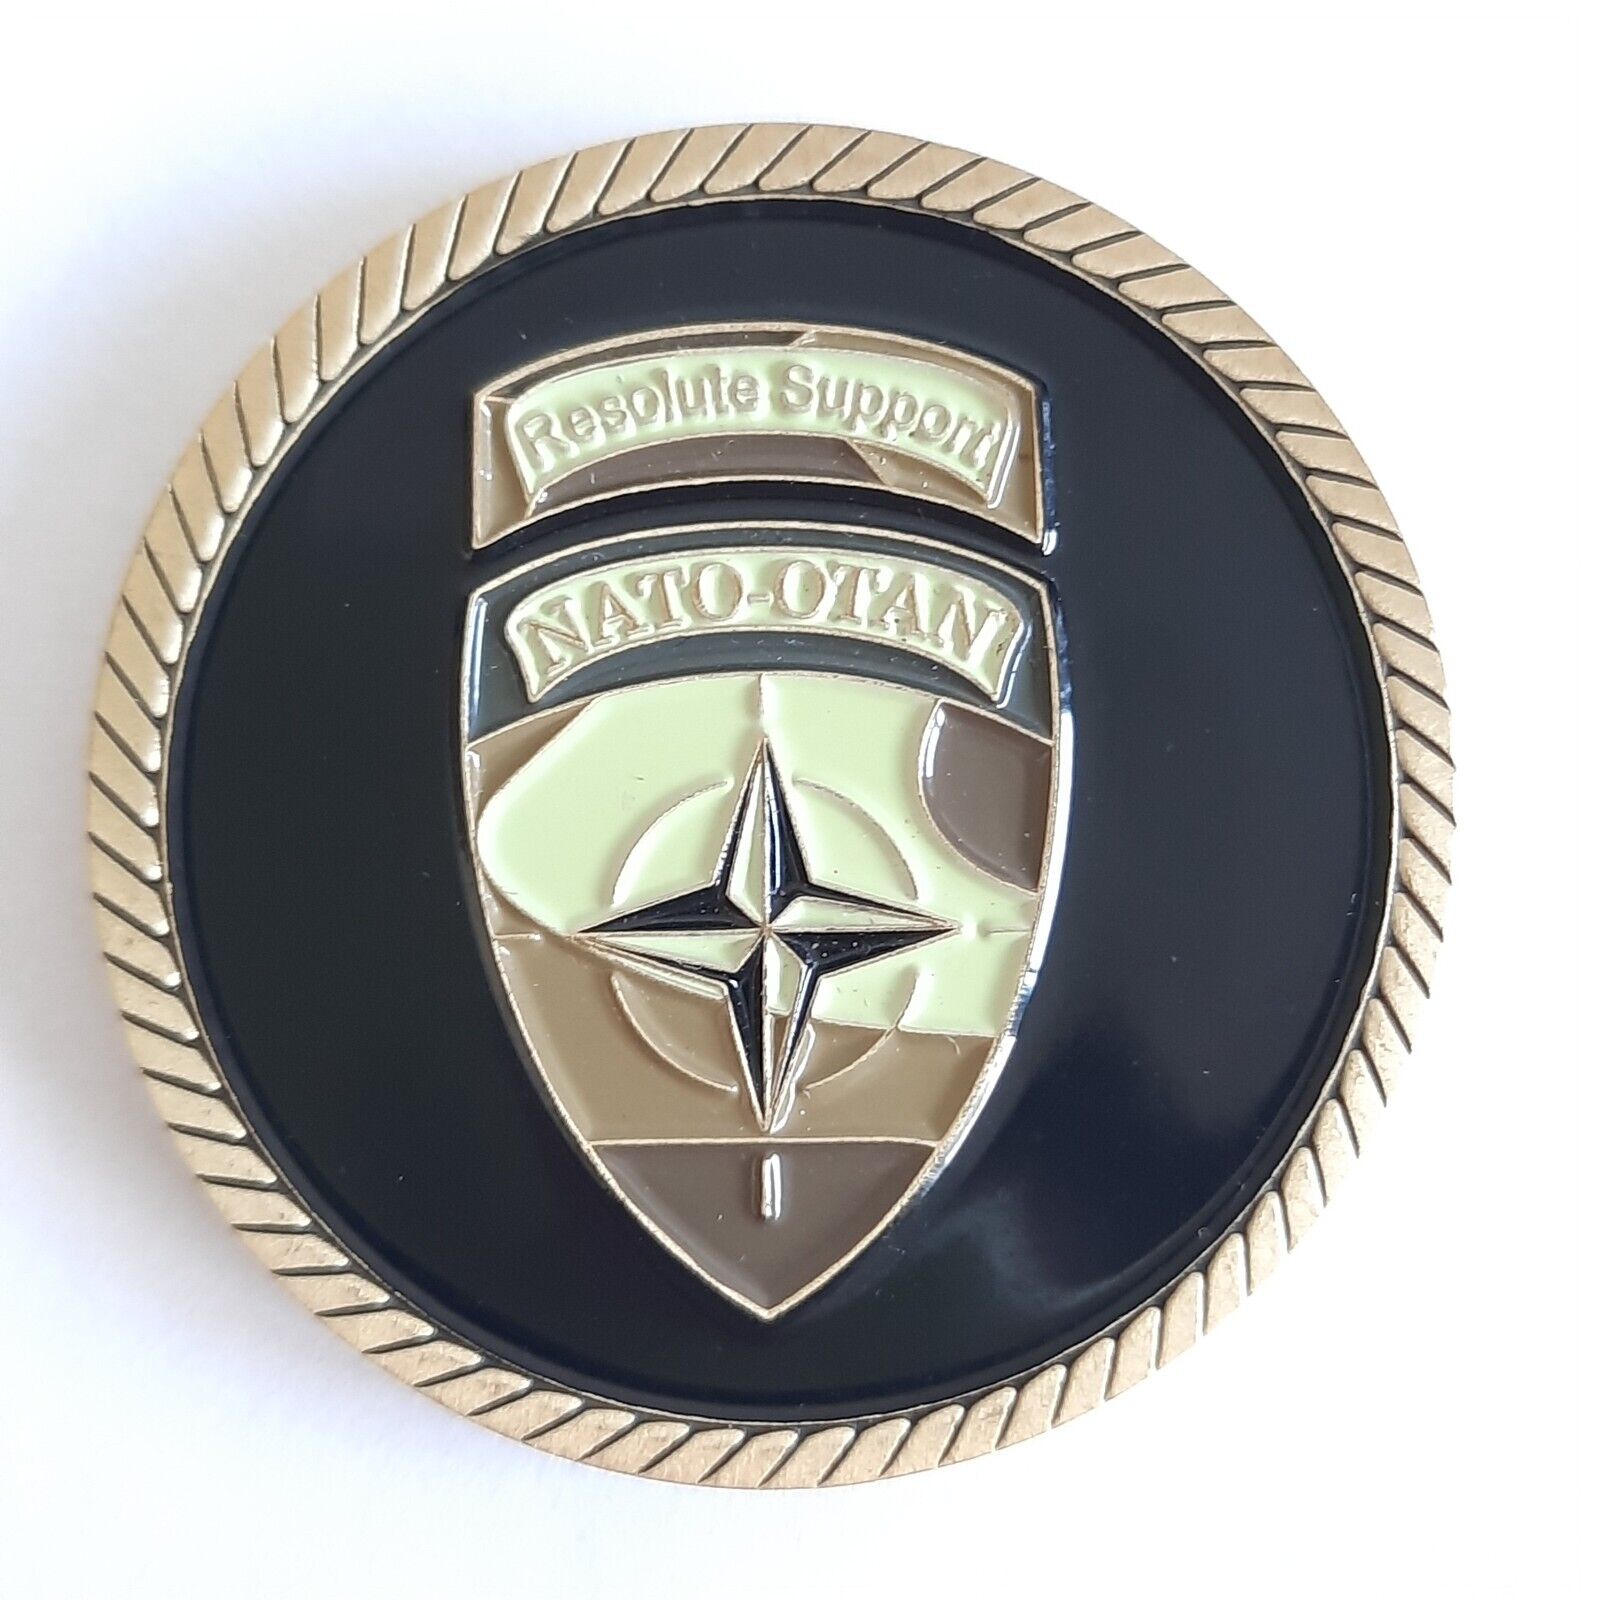 NATO OTAN RESOLUTESUPPORT UNLEASHED IN THE MIDDLE EAST KAF OFS RS CHALLENGE COIN